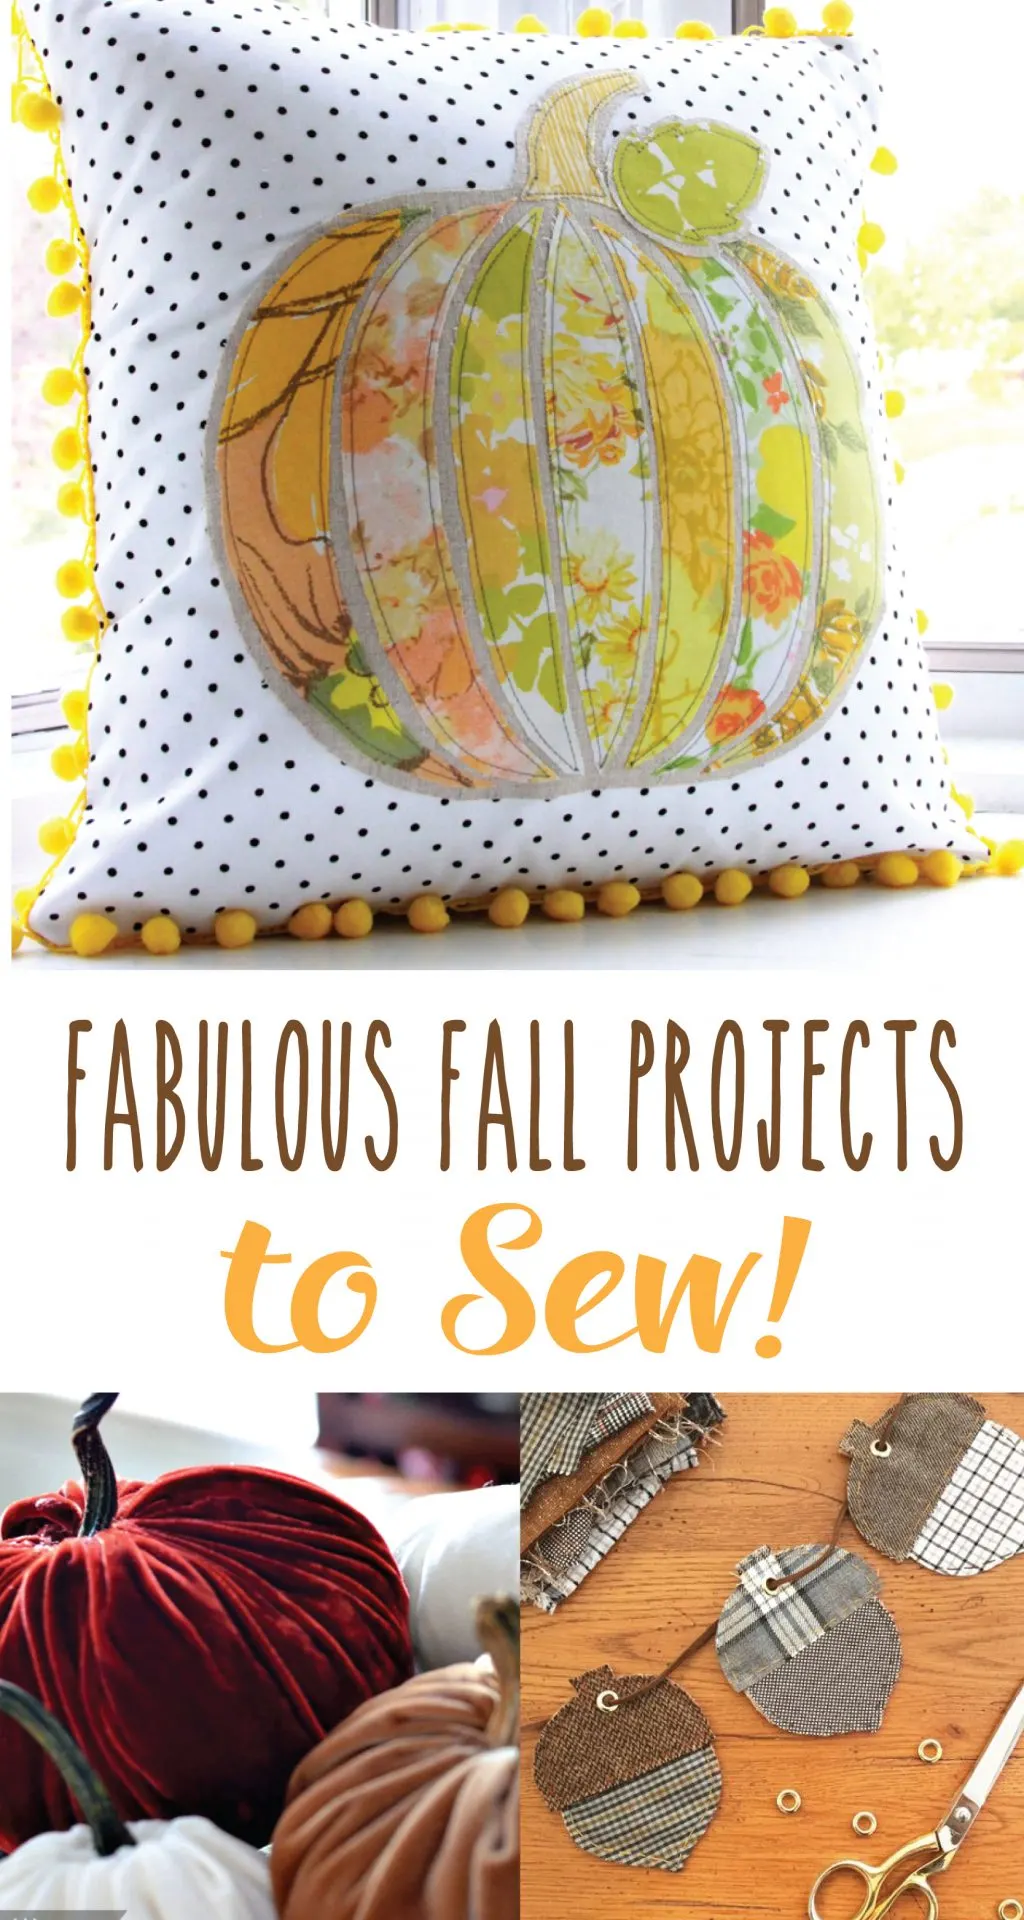 Sew up some fun fall crafts to decorate your home!